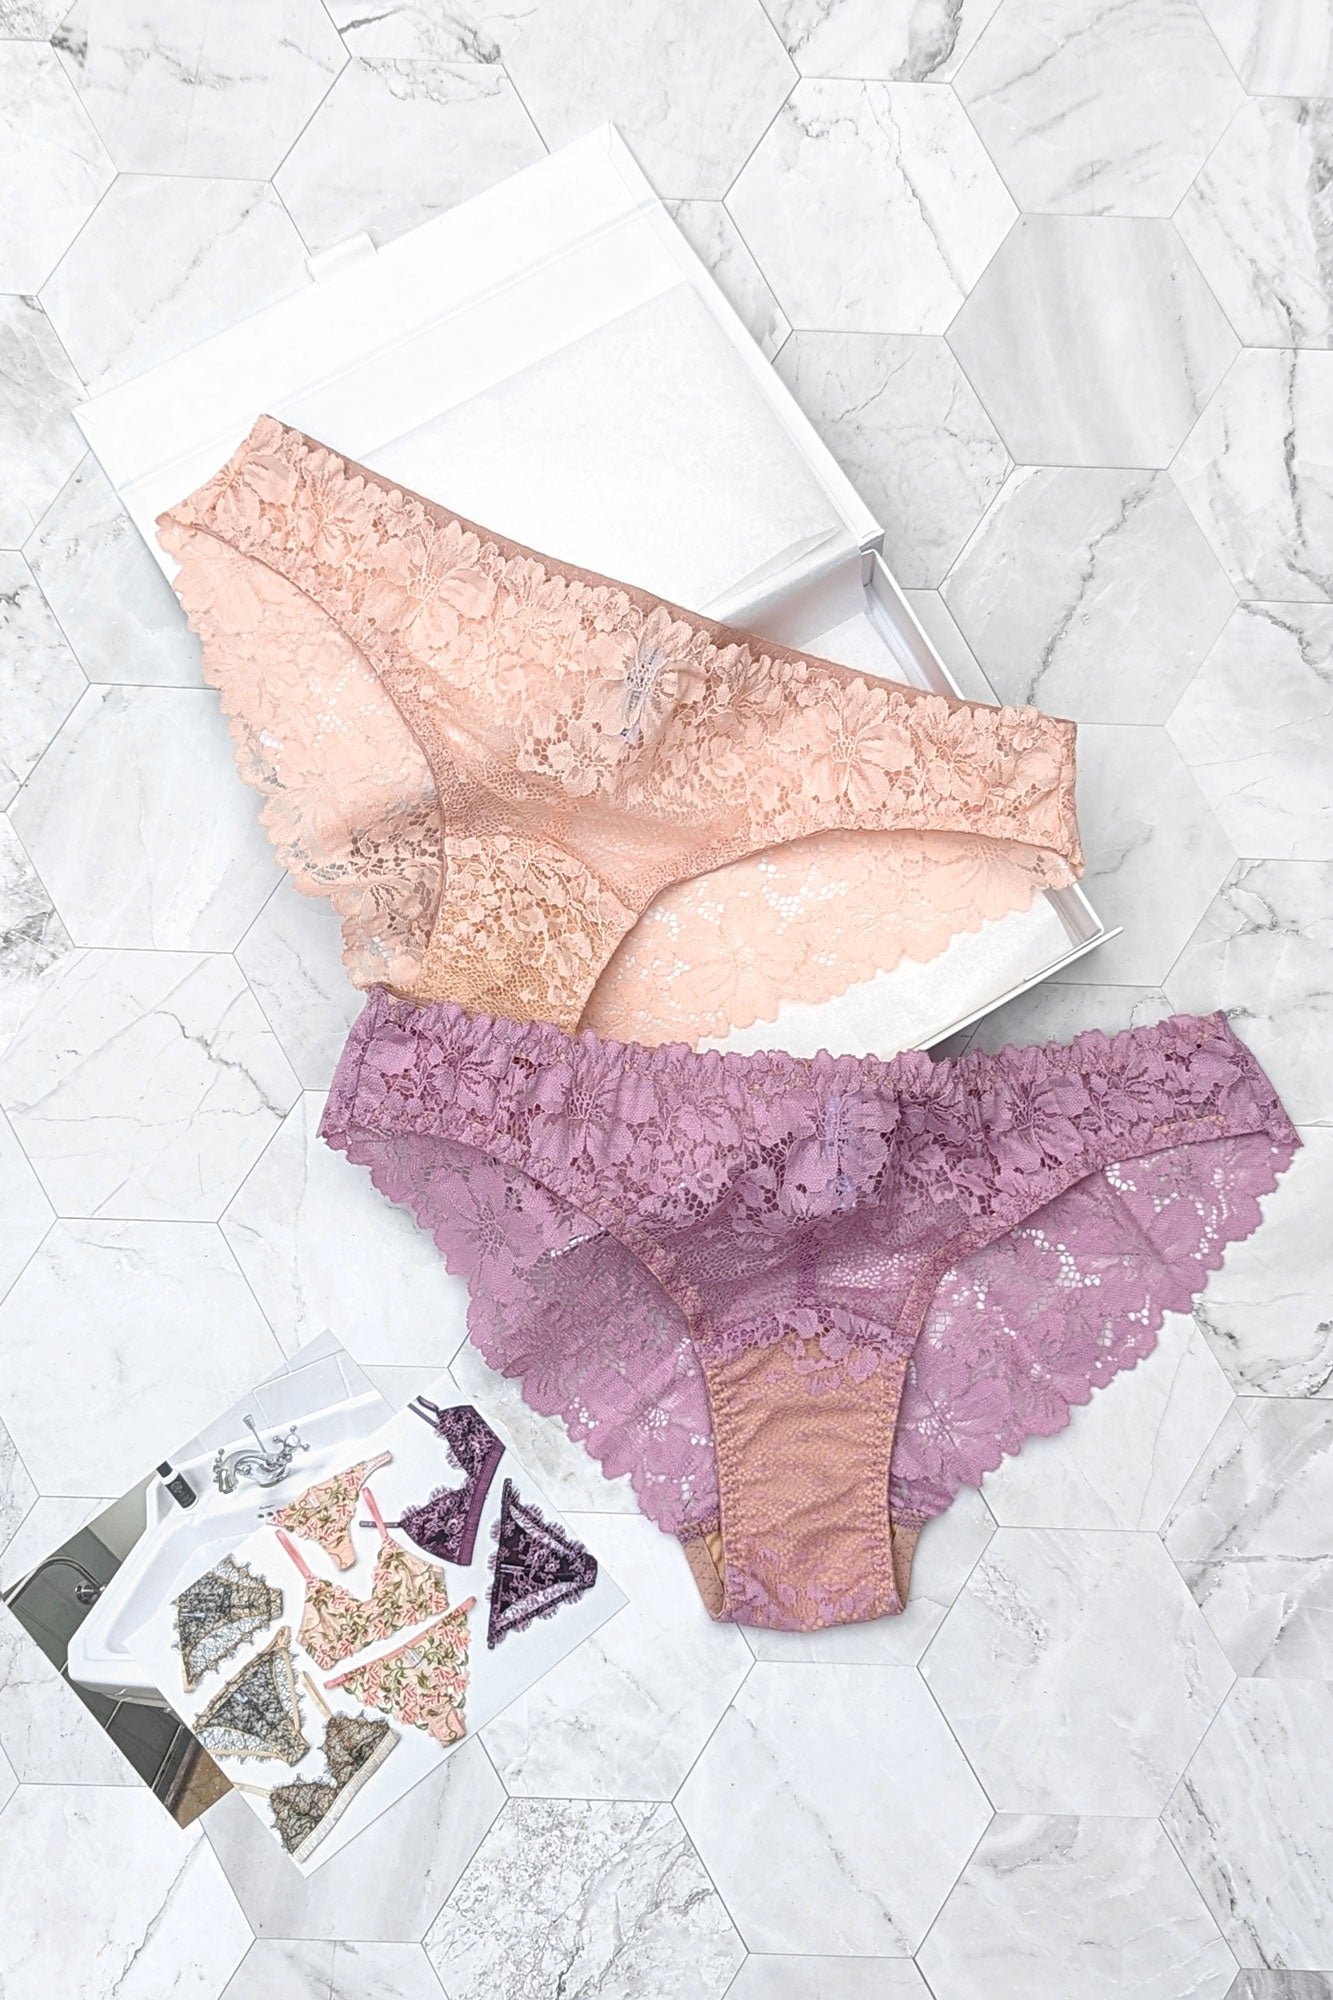 Treat yourself to these underwear sets